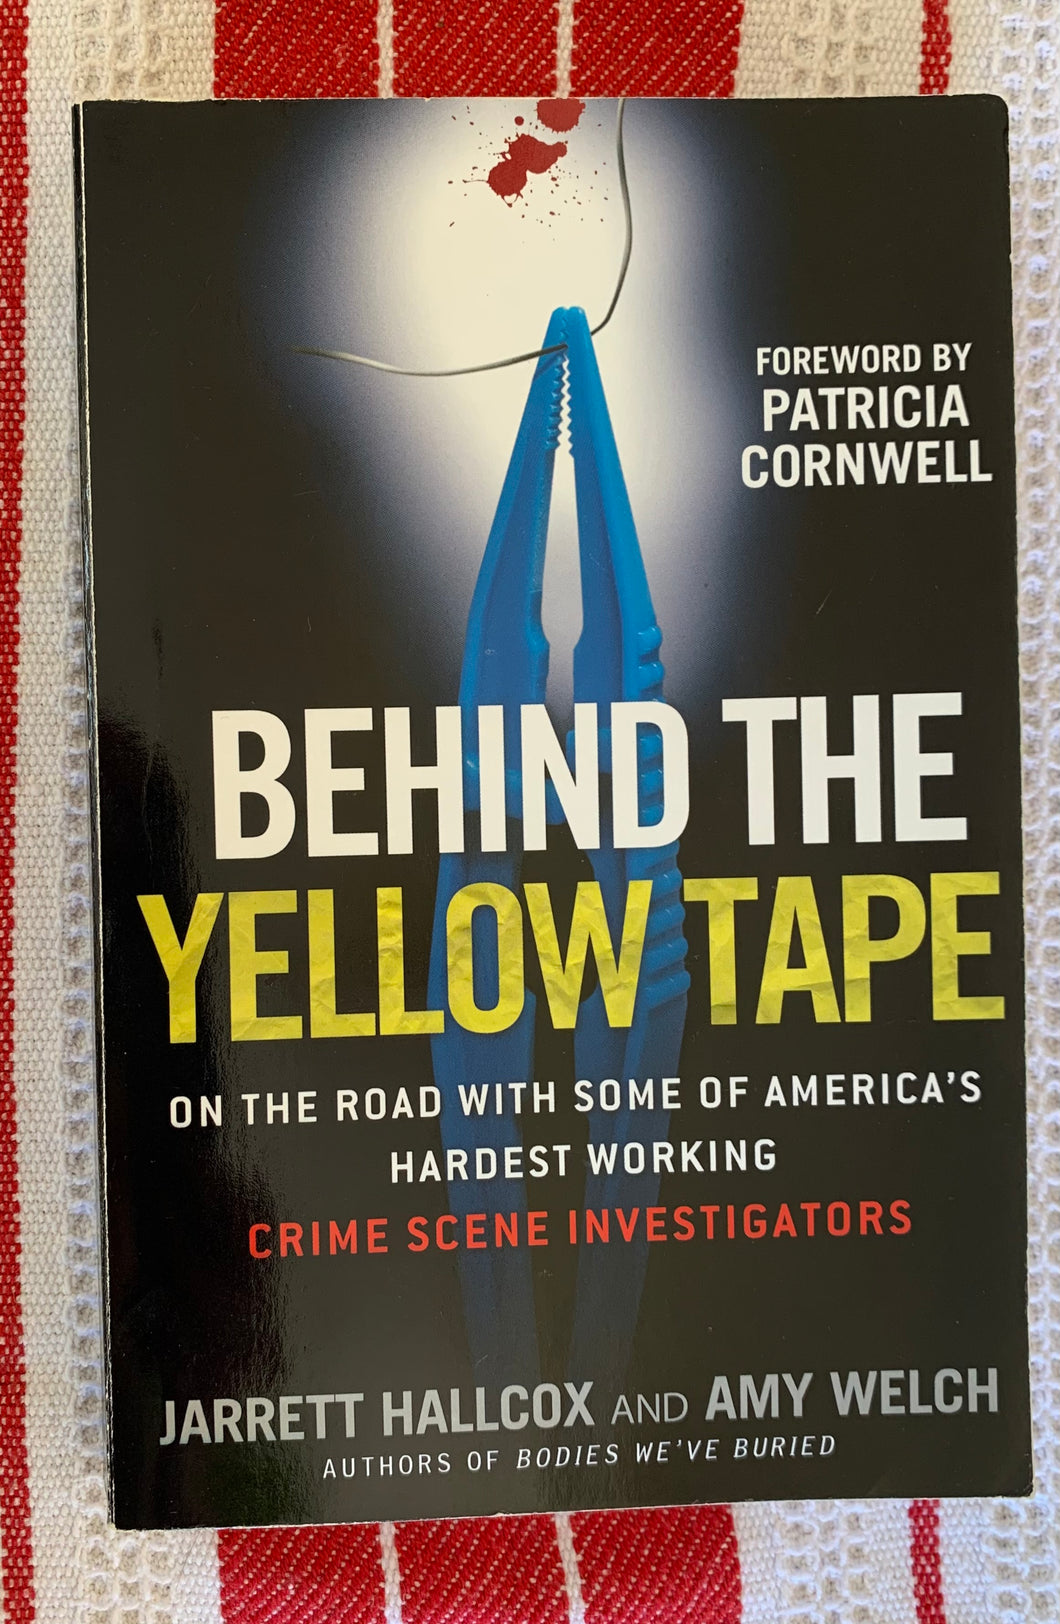 Behind The Yellow Tape: On The Road With Some Of America's Hardest Working Crime Scene Investigators